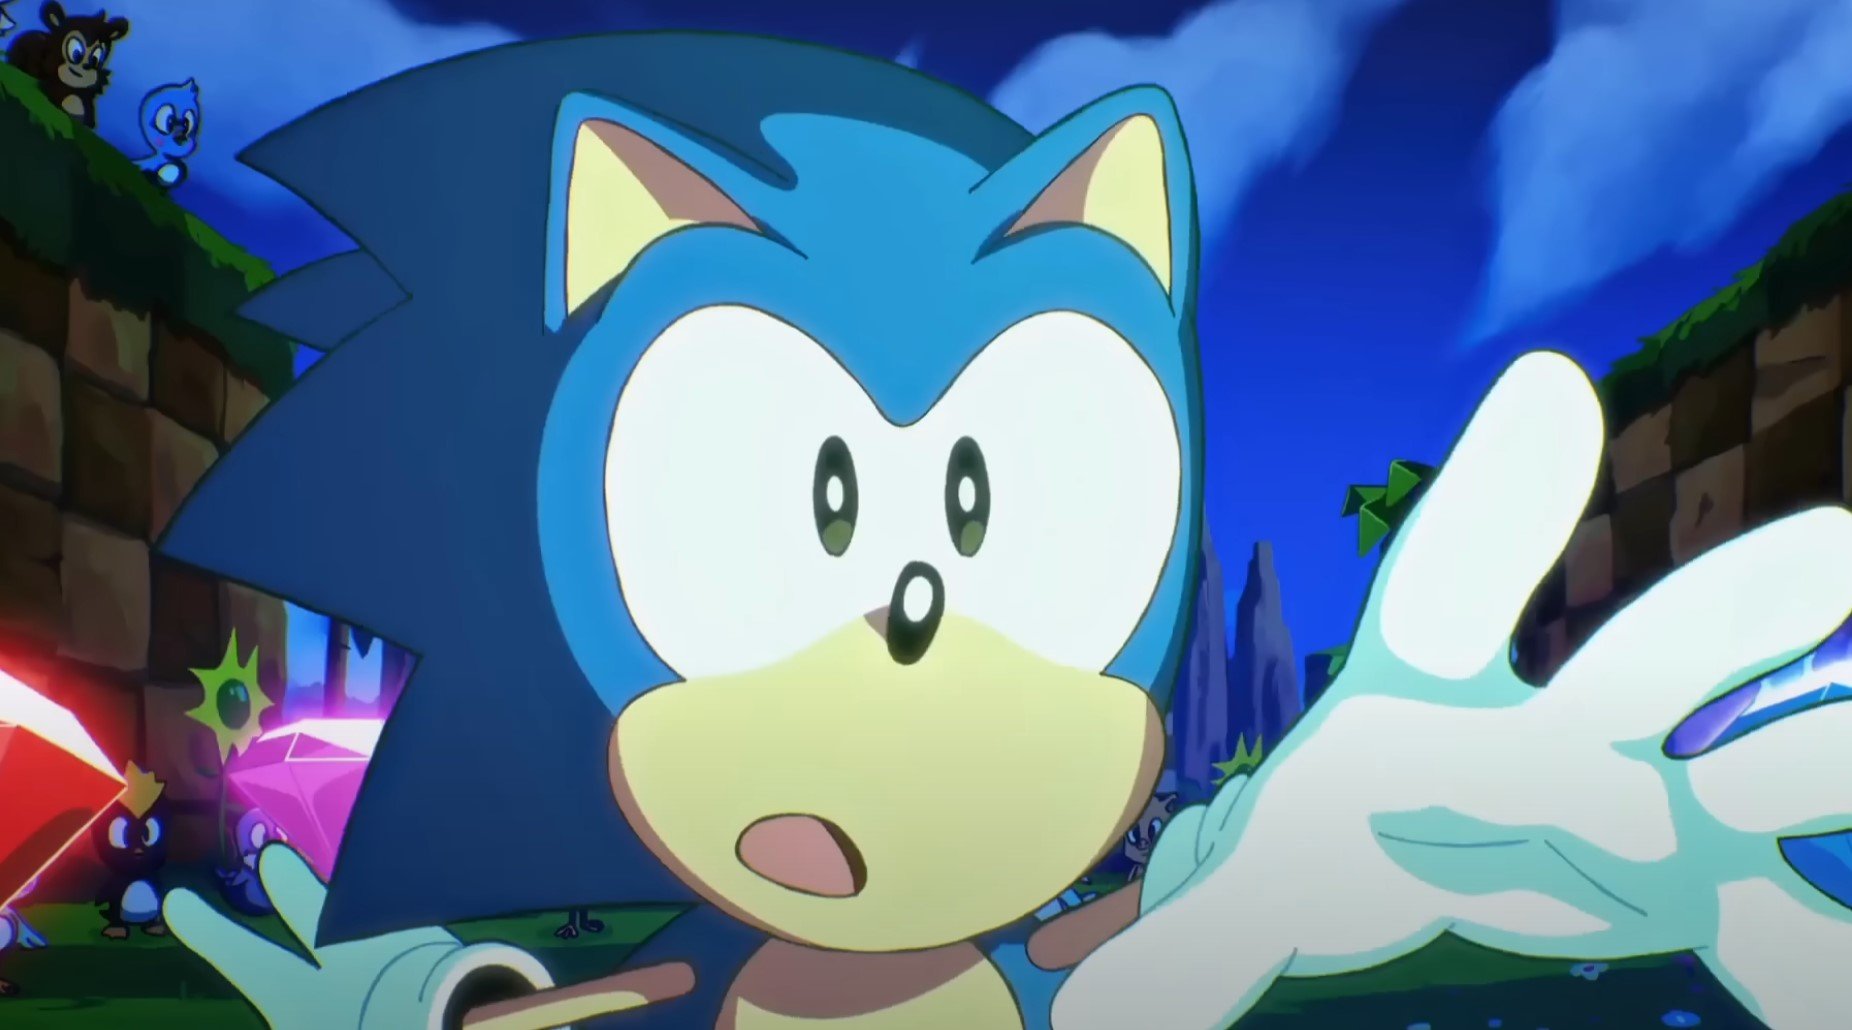 Sega Rolling Out New Update For Sonic Origins, Here's What's Included